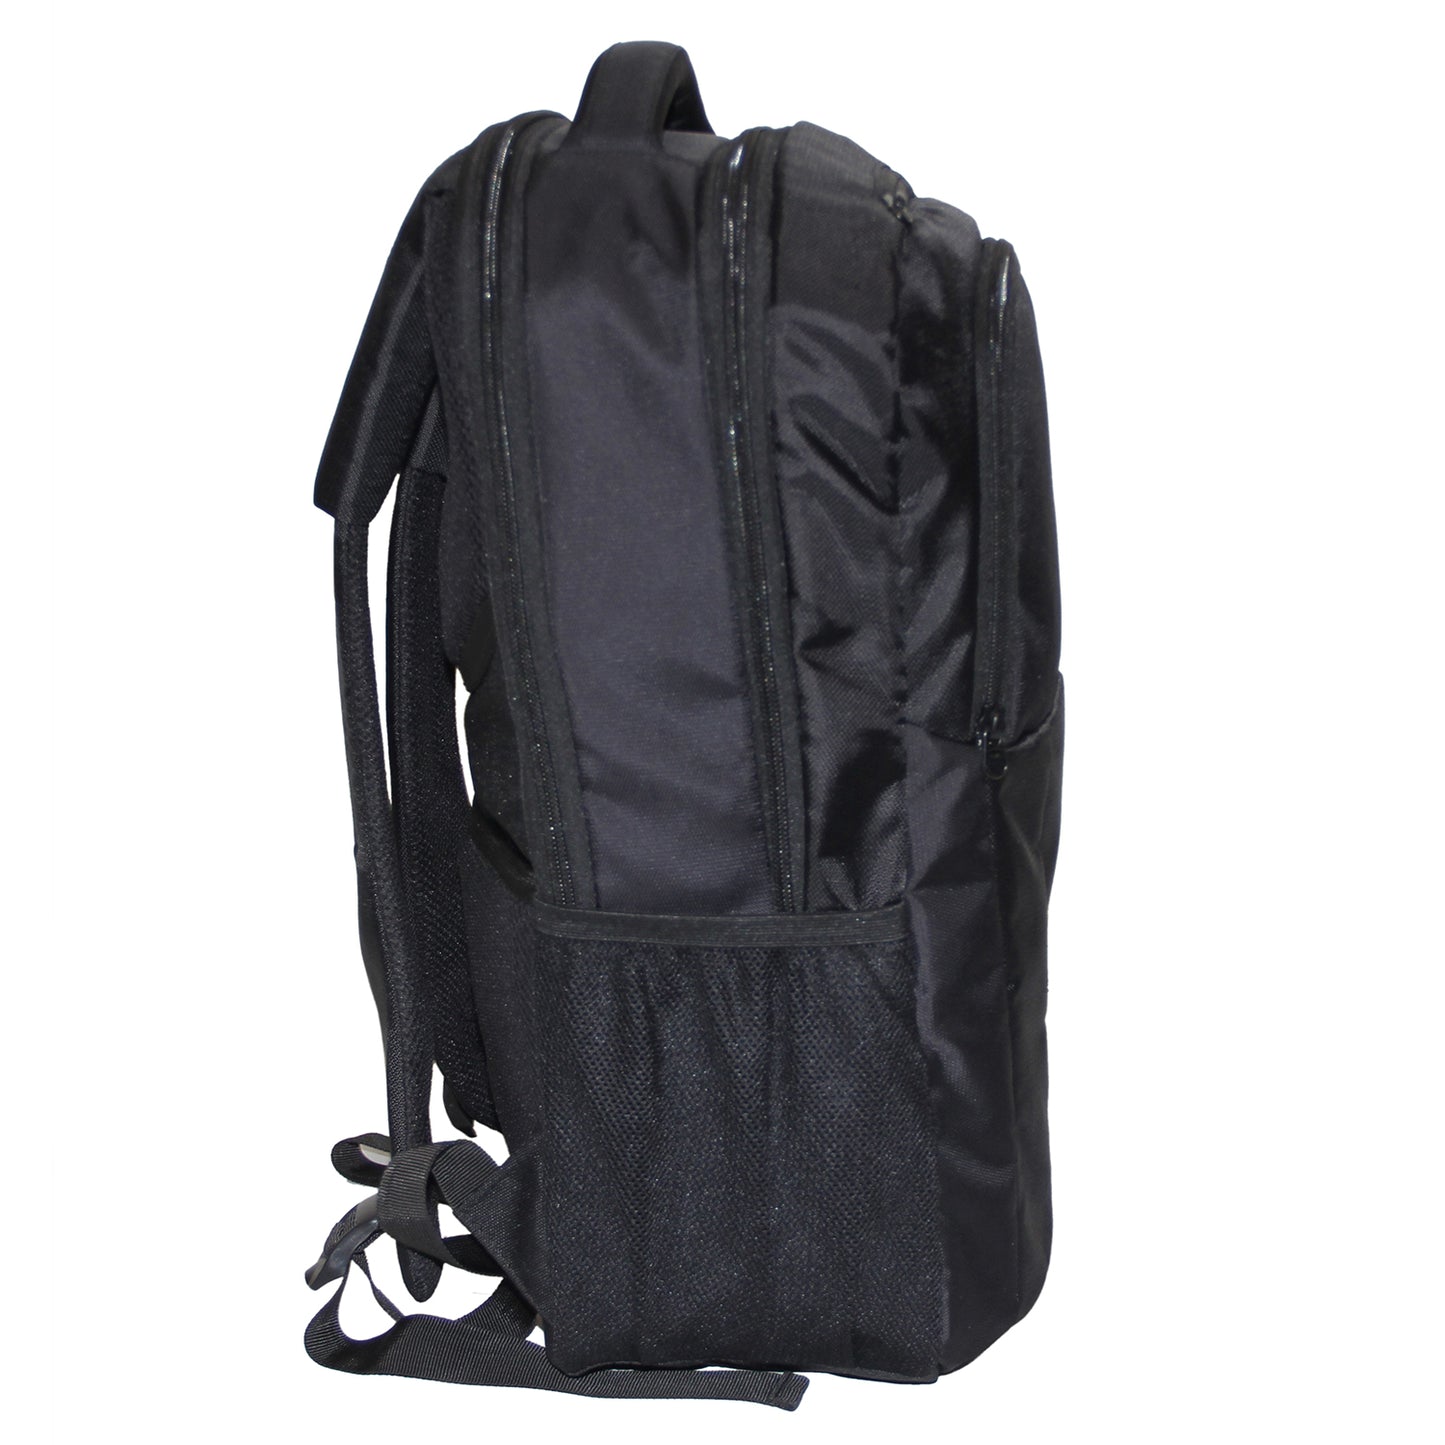 Professional Polyester Backpack